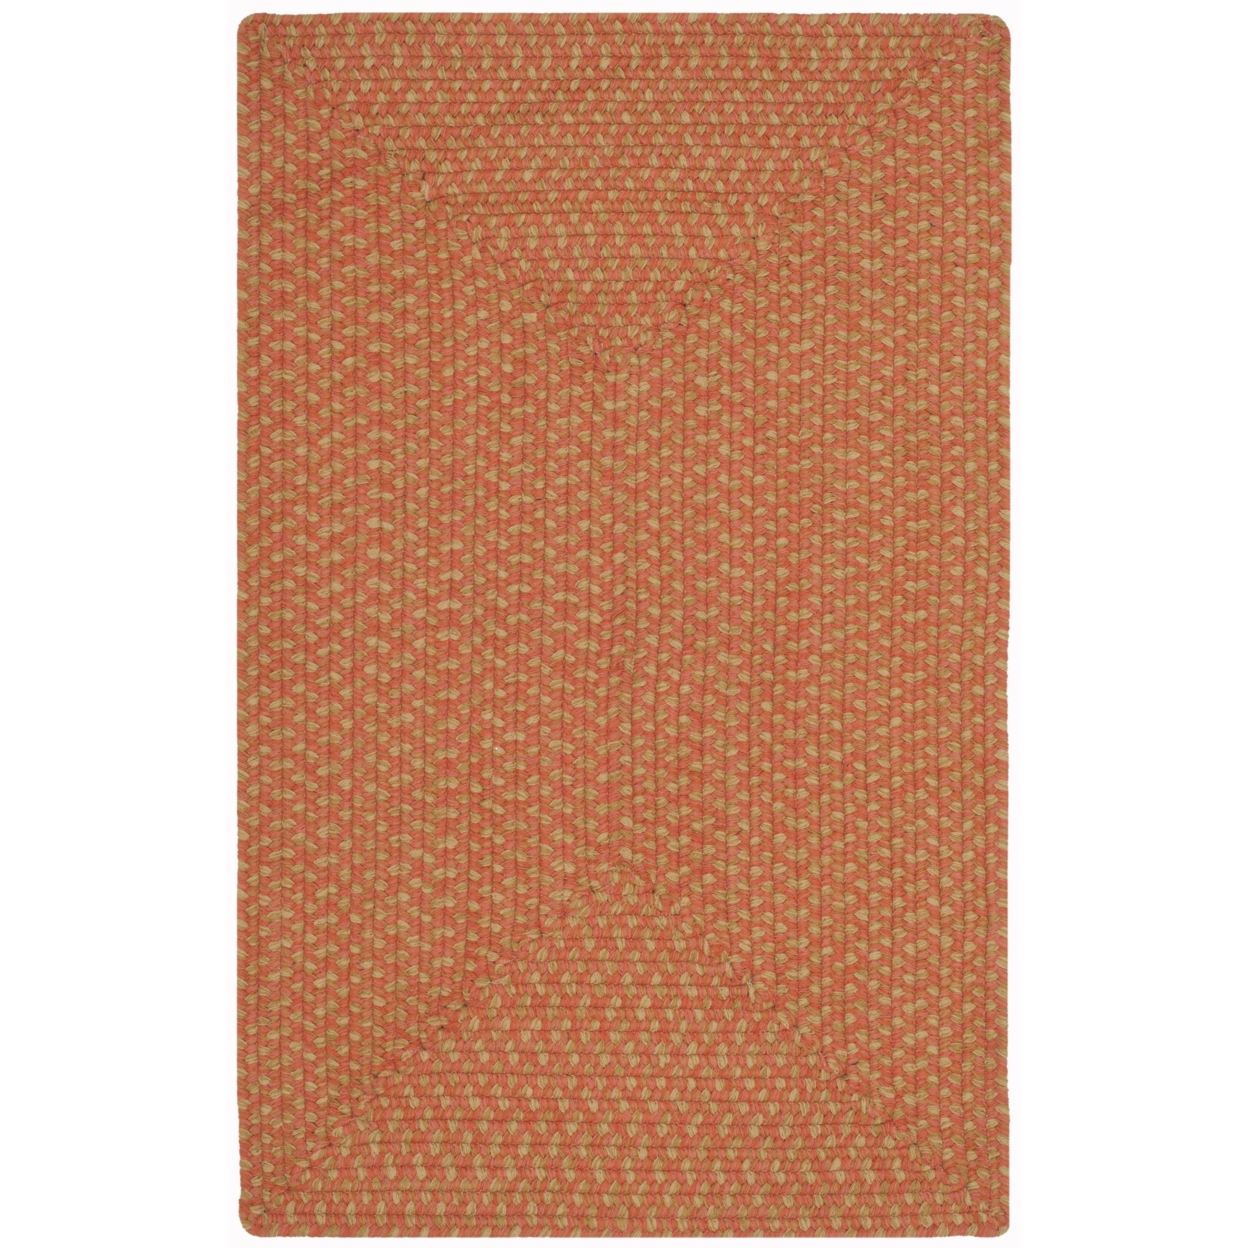 SAFAVIEH Braided Collection BRD168A Handwoven Multi Rug - 2' 6 X 4'